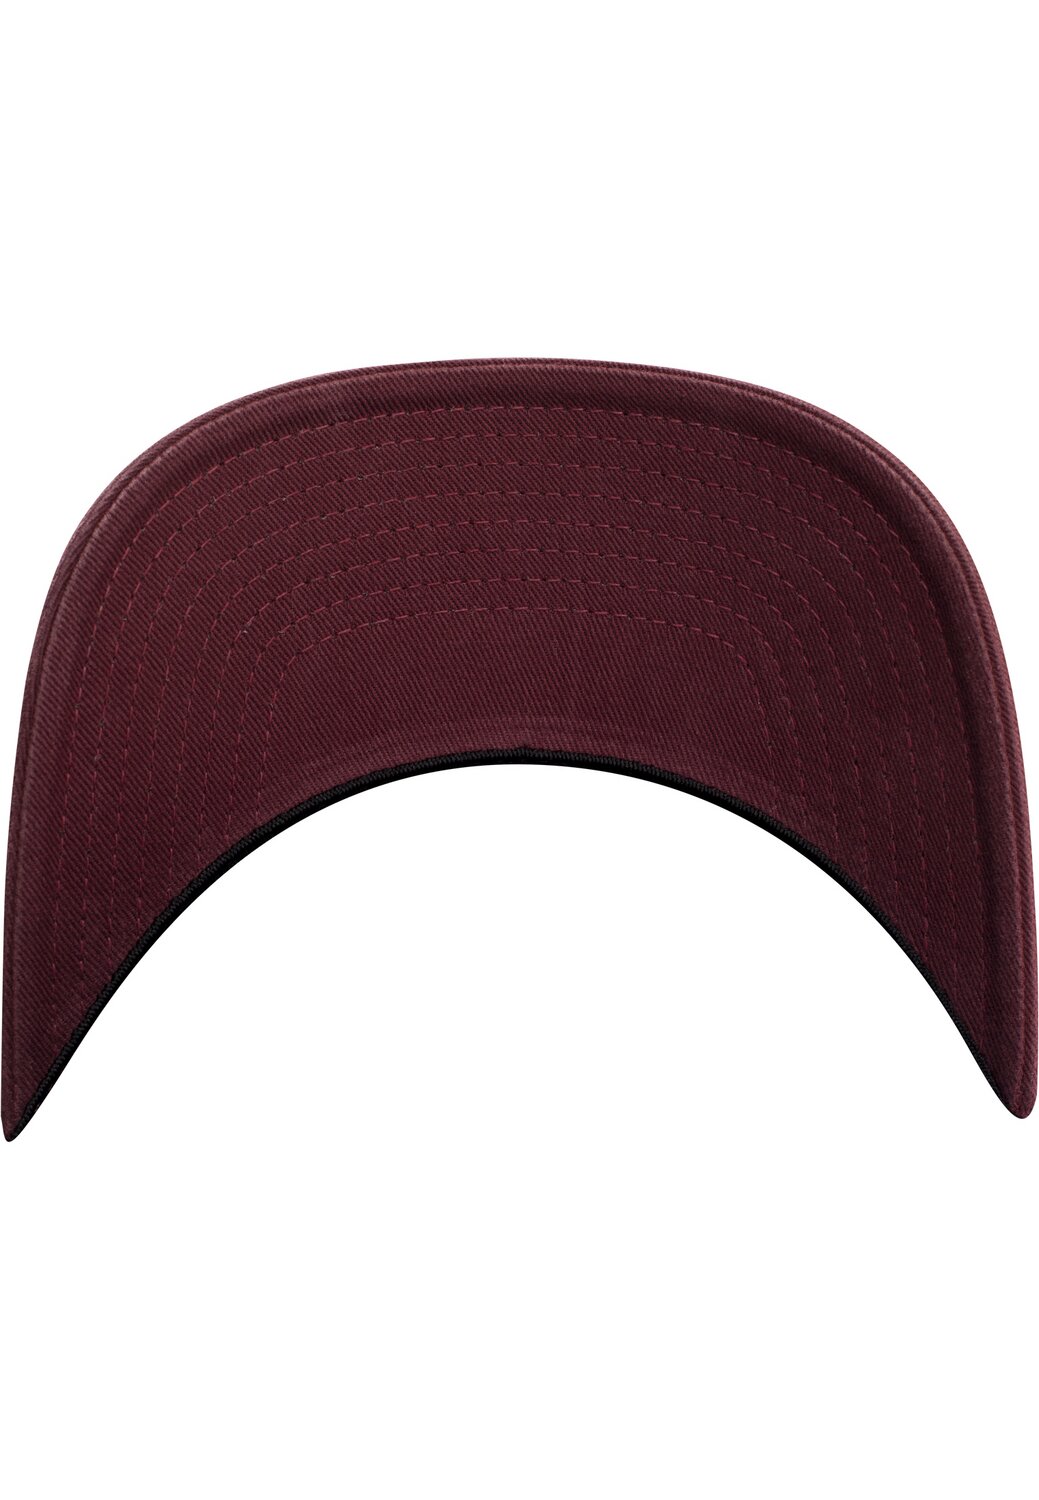 MAXISCOOT Garment Dad Cotton Hat maroon | Washed Flexfit